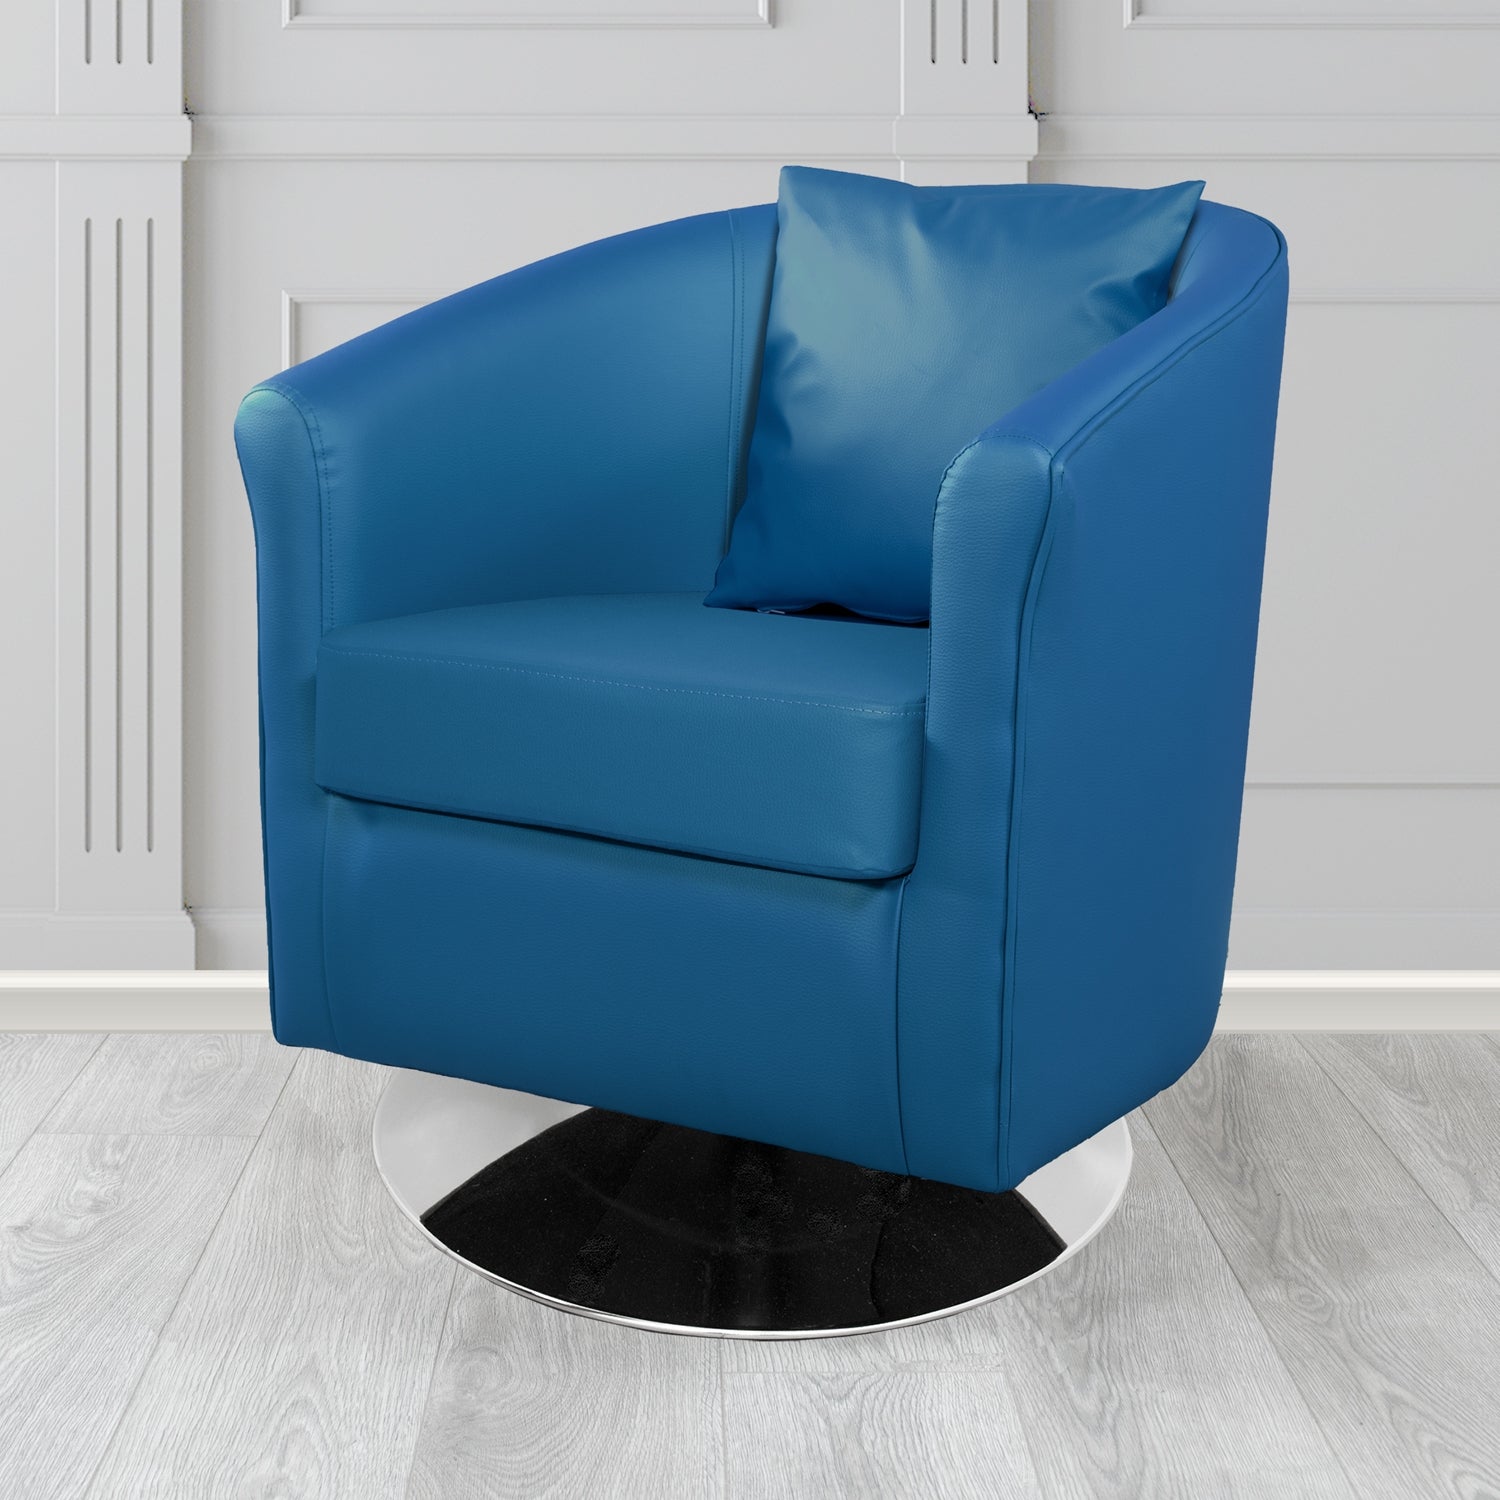 St Tropez Swivel Tub Chair with Scatter Cushion in Madrid Royal Faux Leather - The Tub Chair Shop